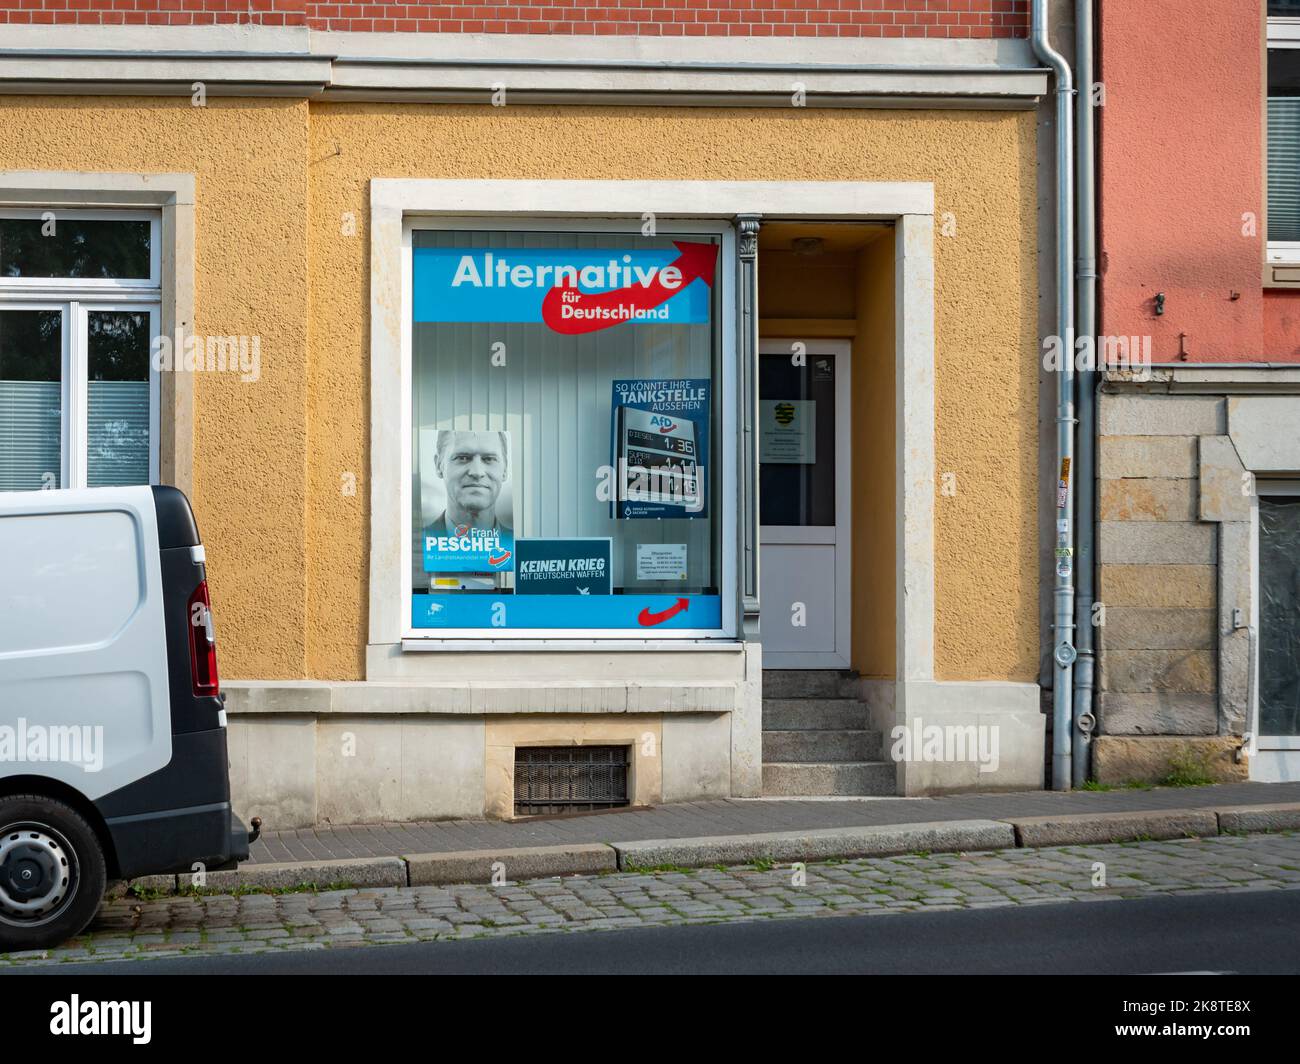 Party office of the AfD in the town. Service of the conservative political party Alternative für Deutschland (Alternative for Germany). Stock Photo